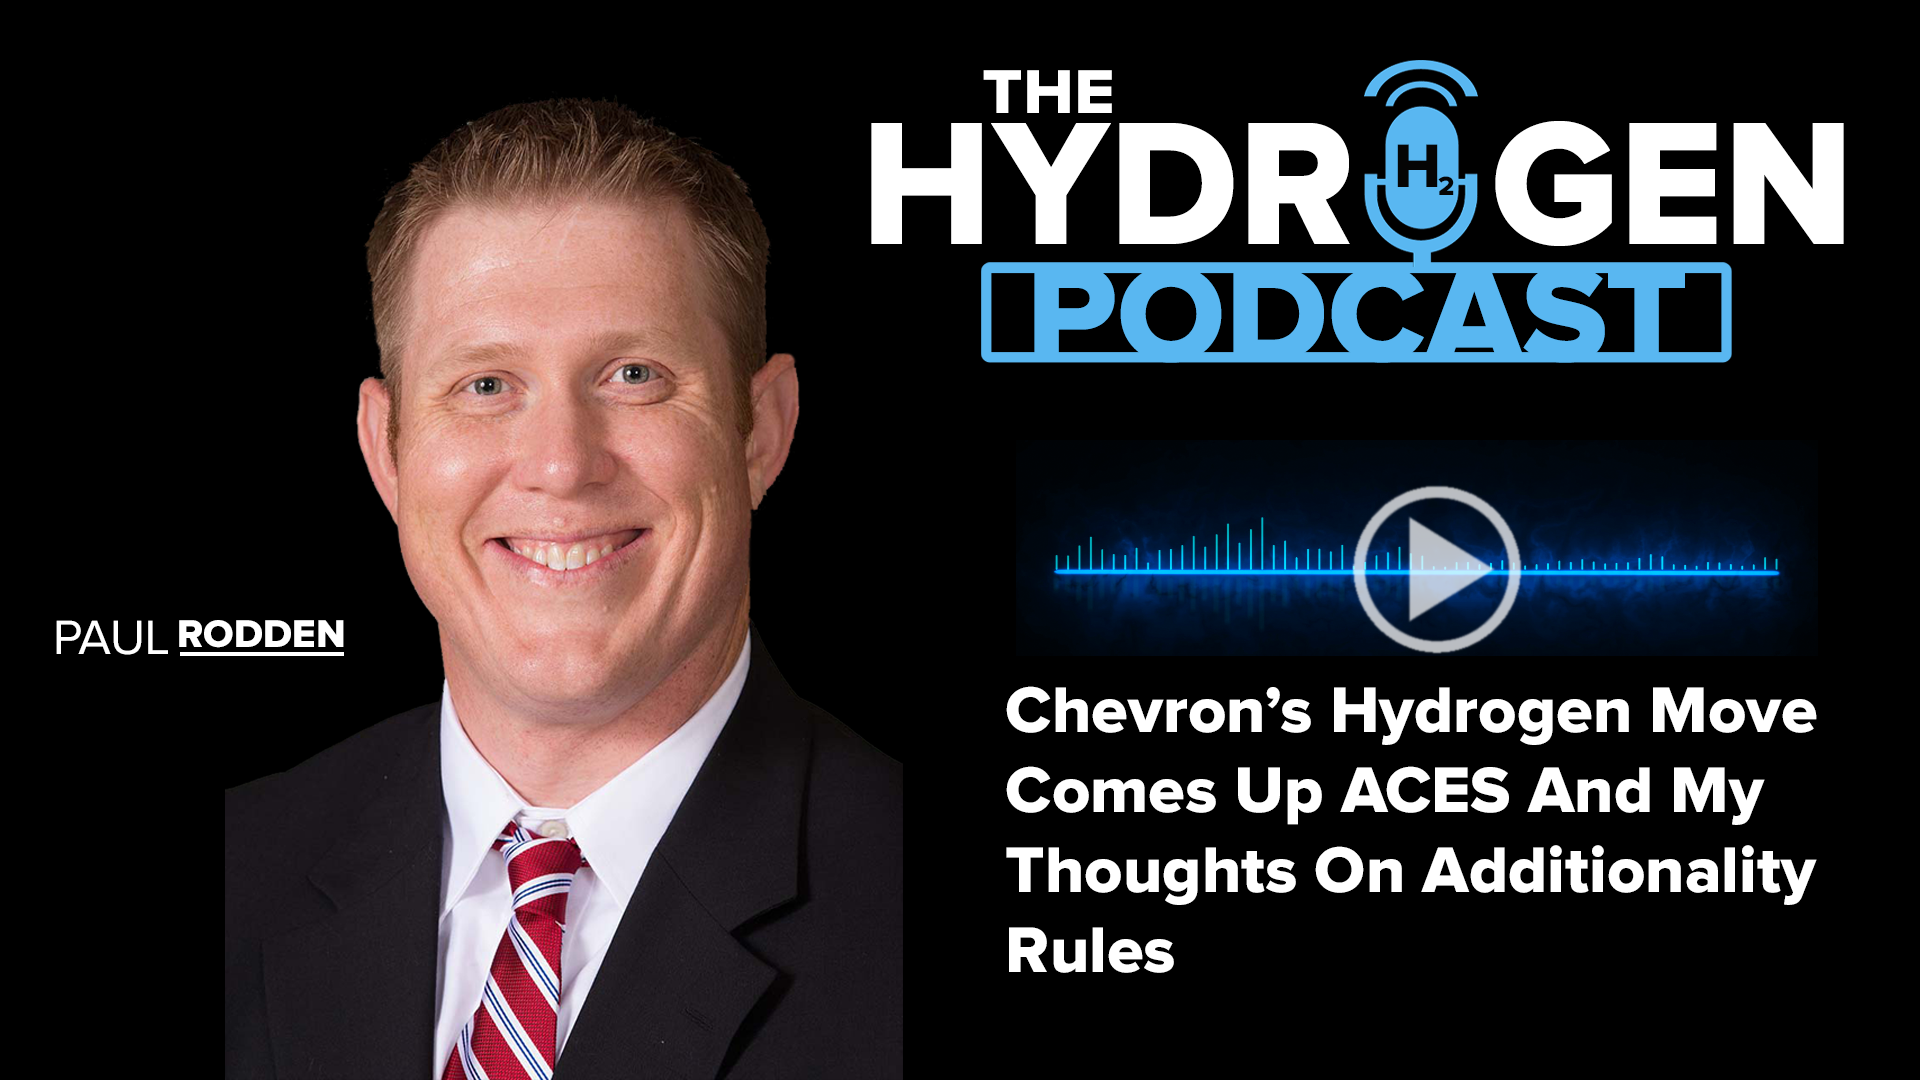 The Hydrogen Podcast